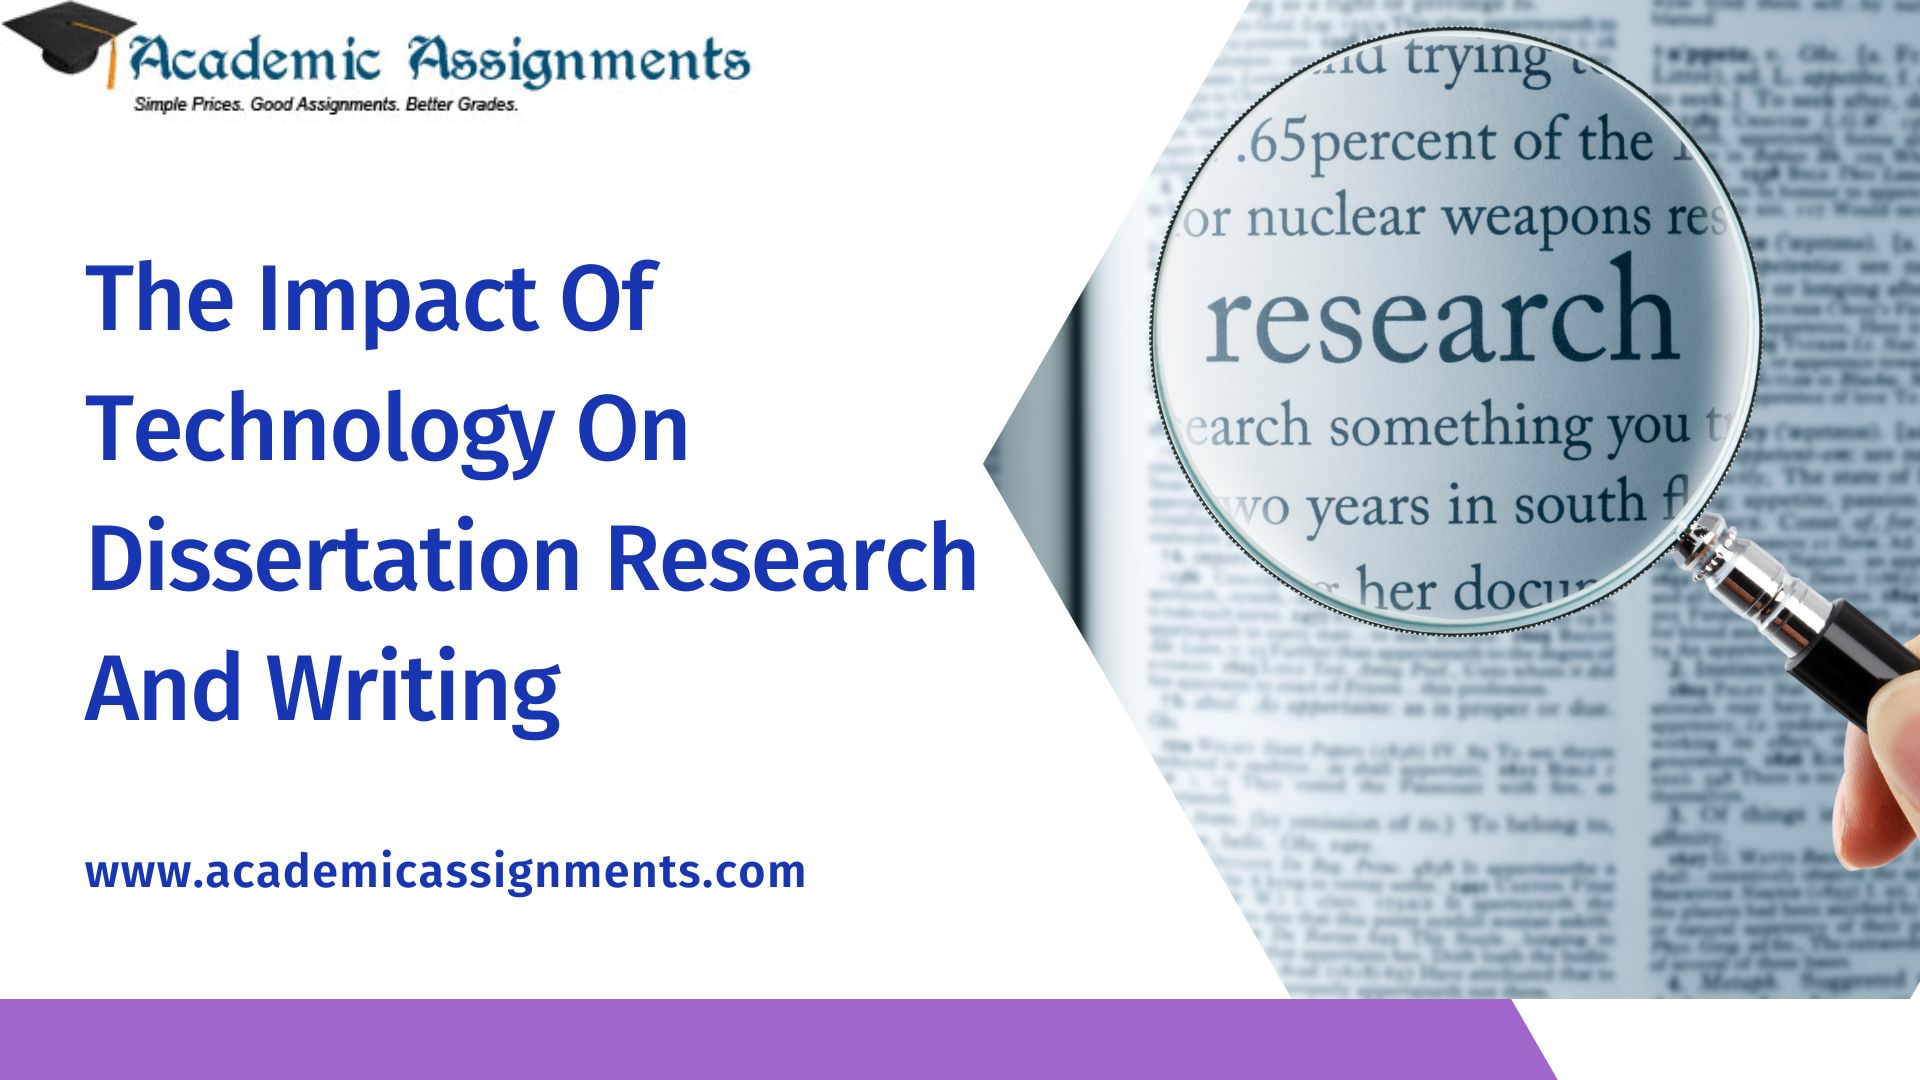 The Impact Of Technology On Dissertation Research And Writing